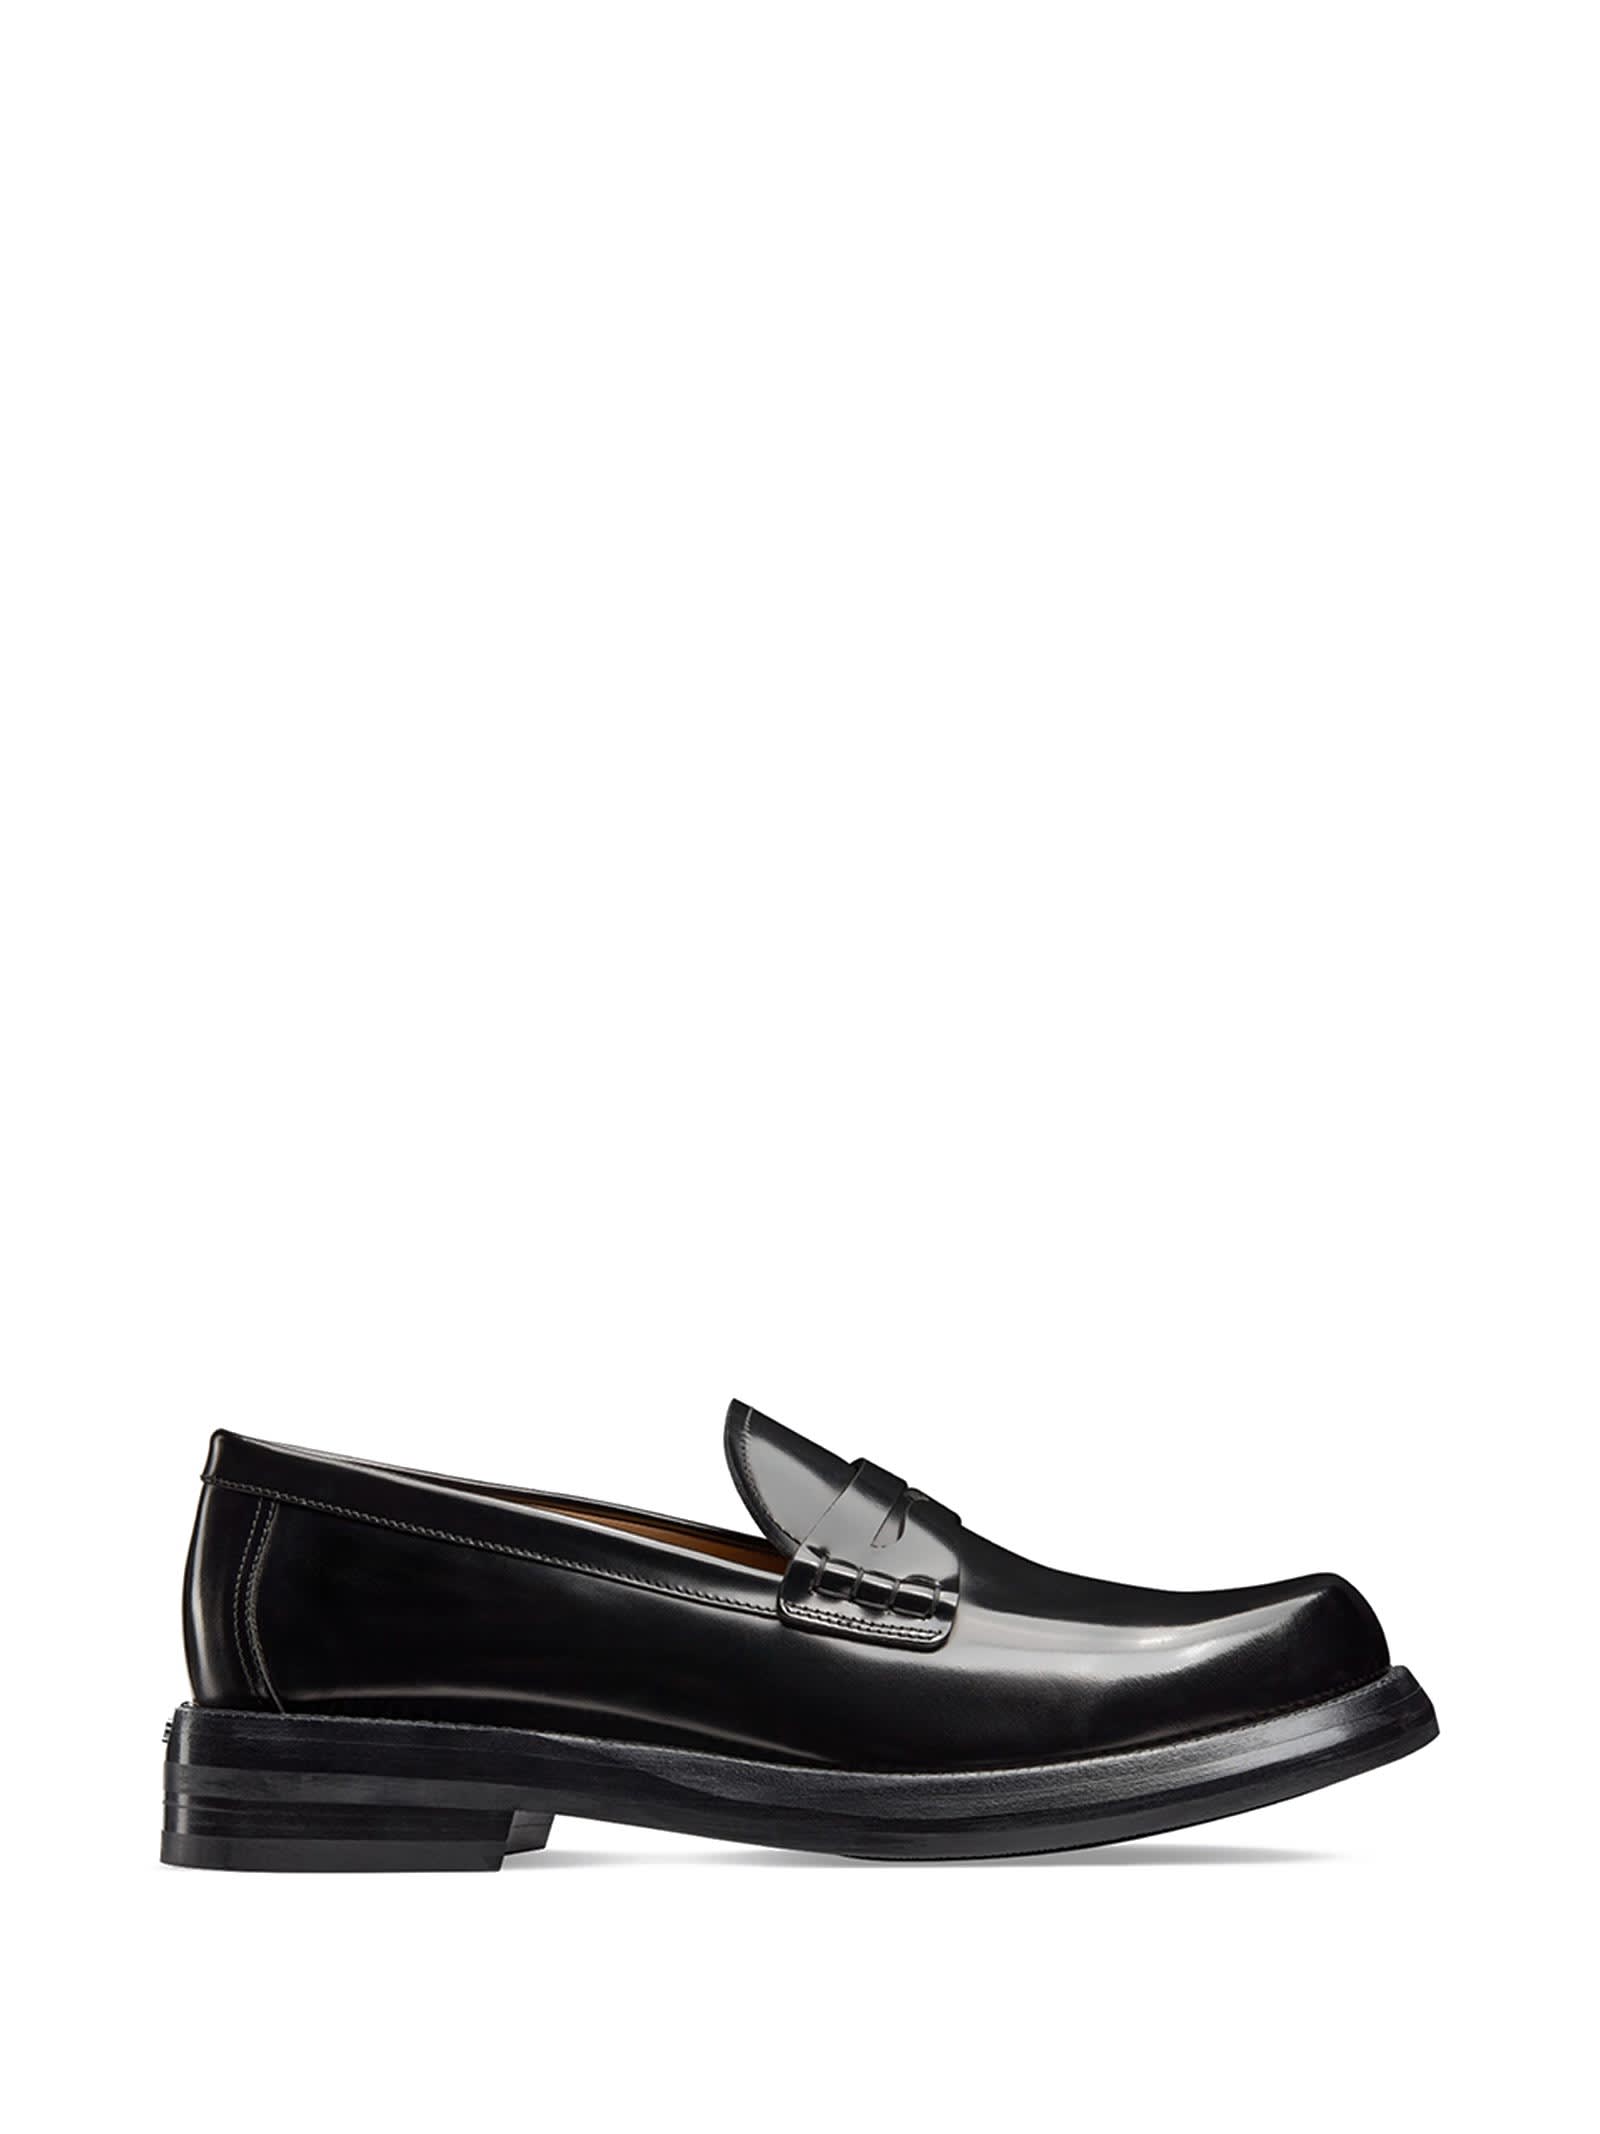 Dior Loafers In Black